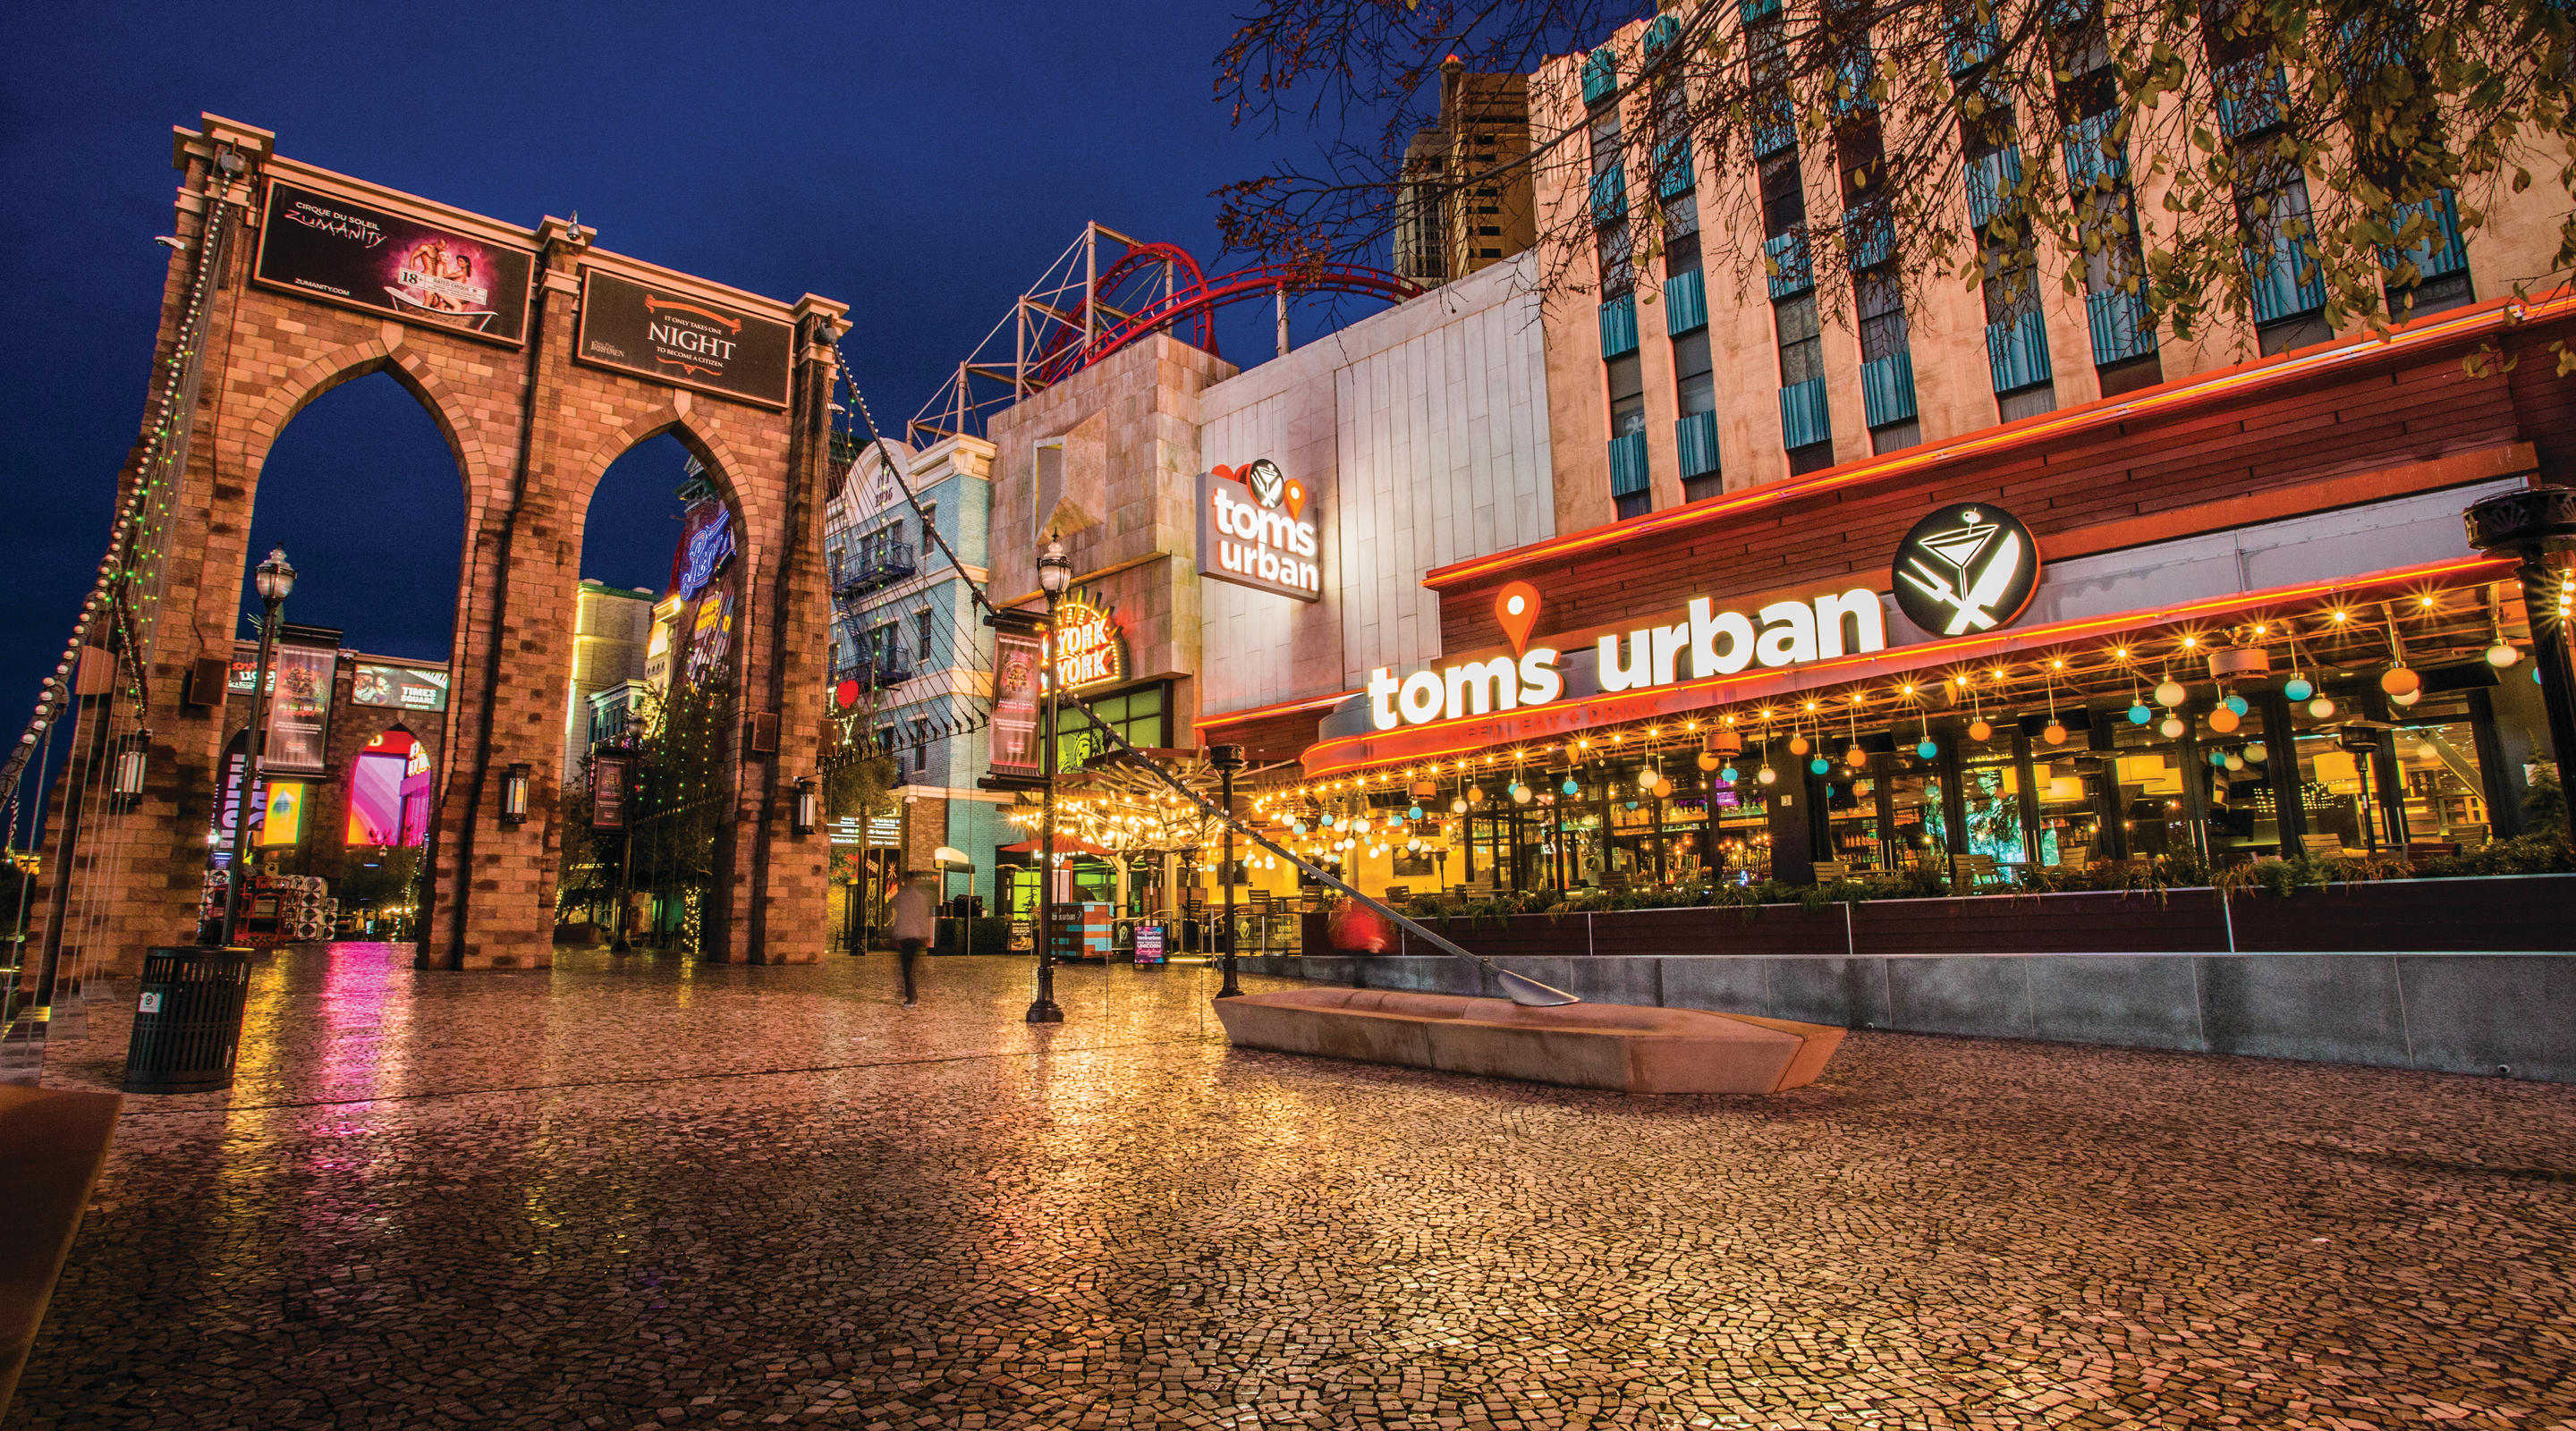 A view of Tom's Urban from the outside.